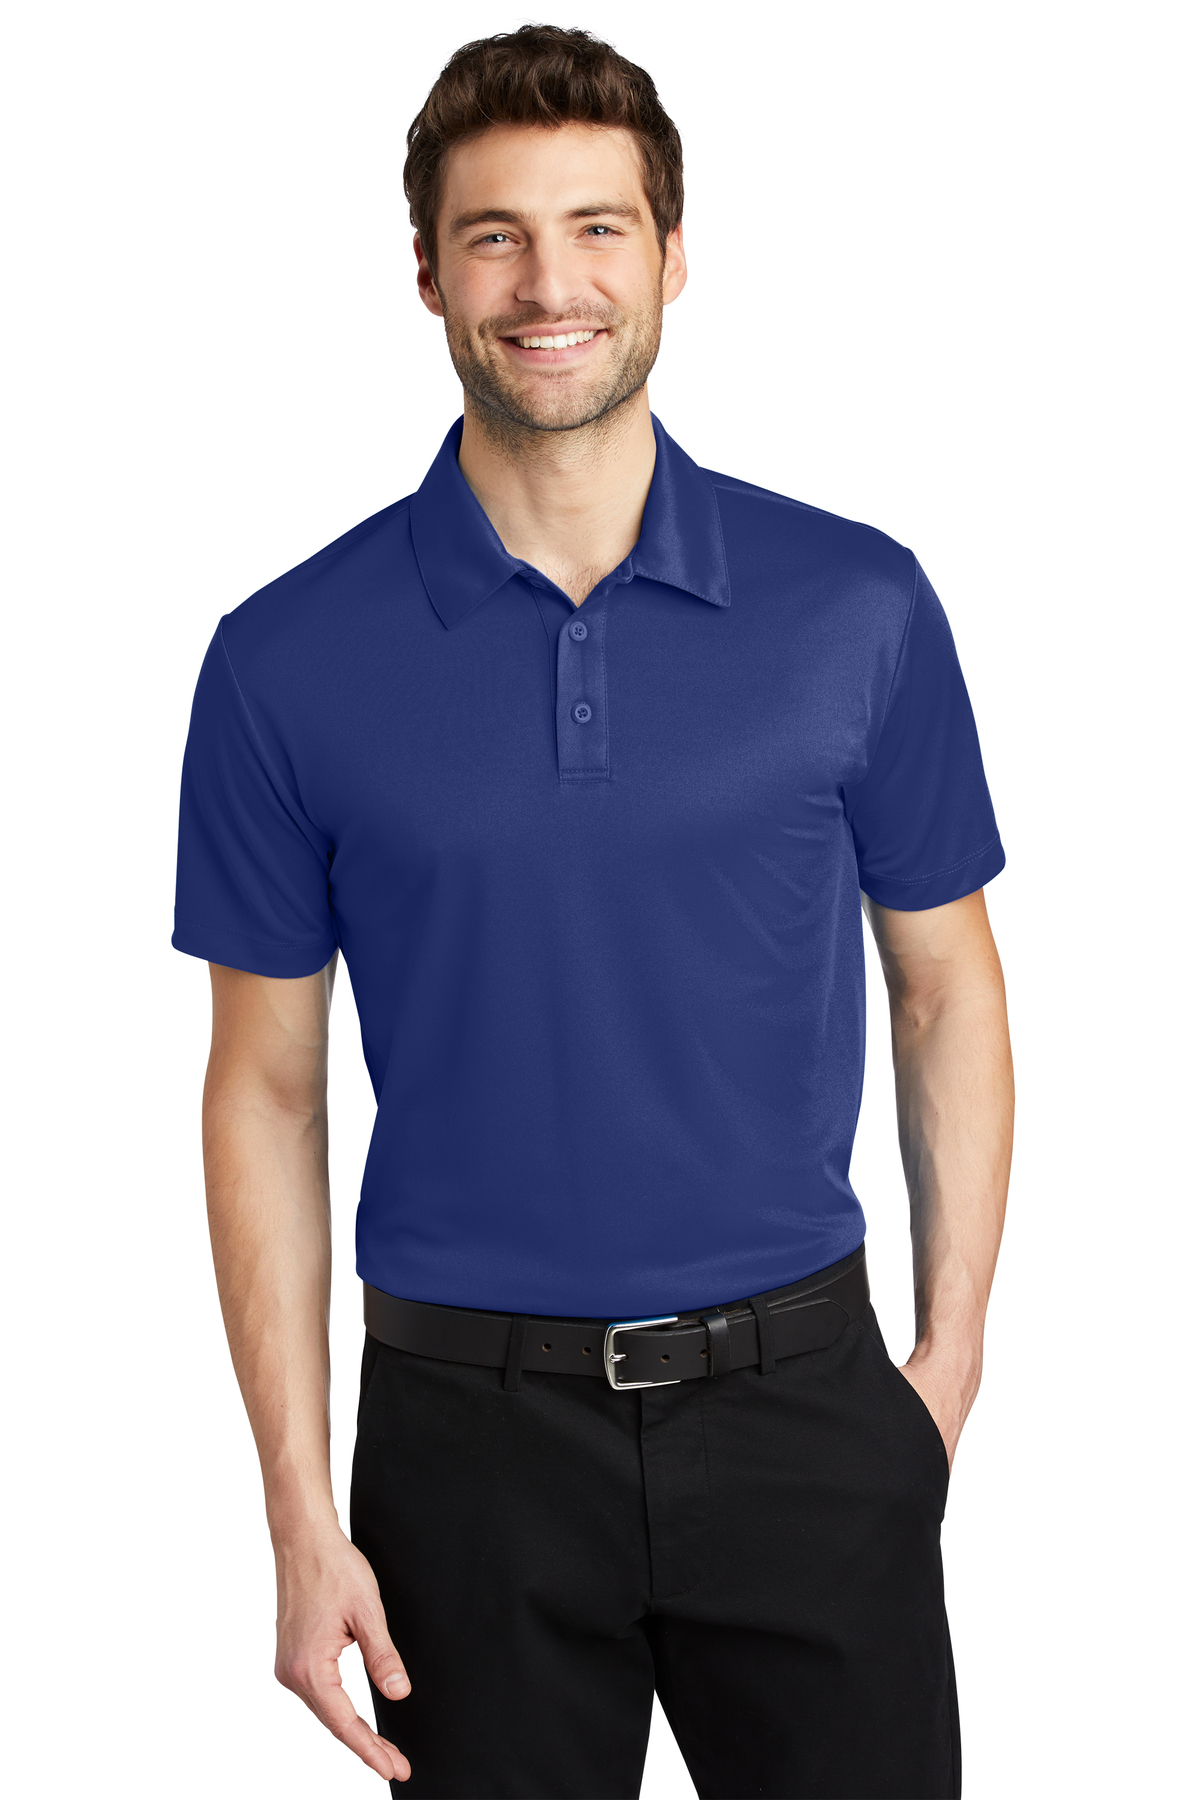 K540 - Youth & Adult moisture wicking Polo shirt-Royal blue